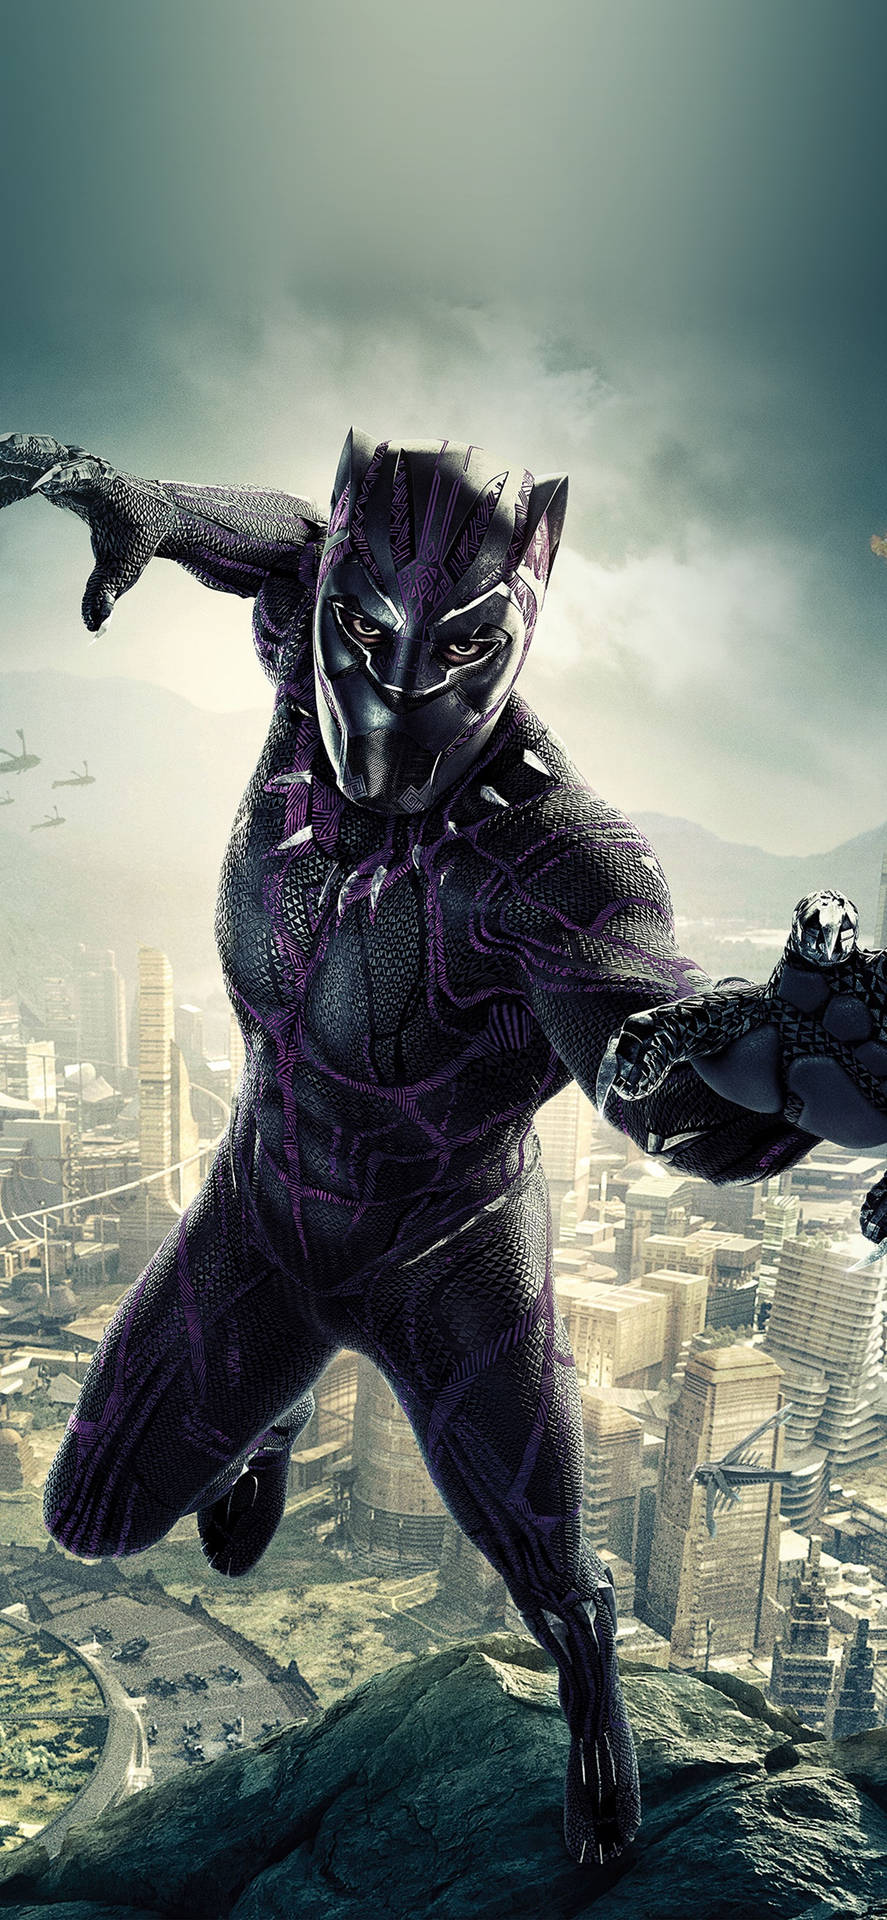 Black Panther Superhero King T'challa City Fly Background